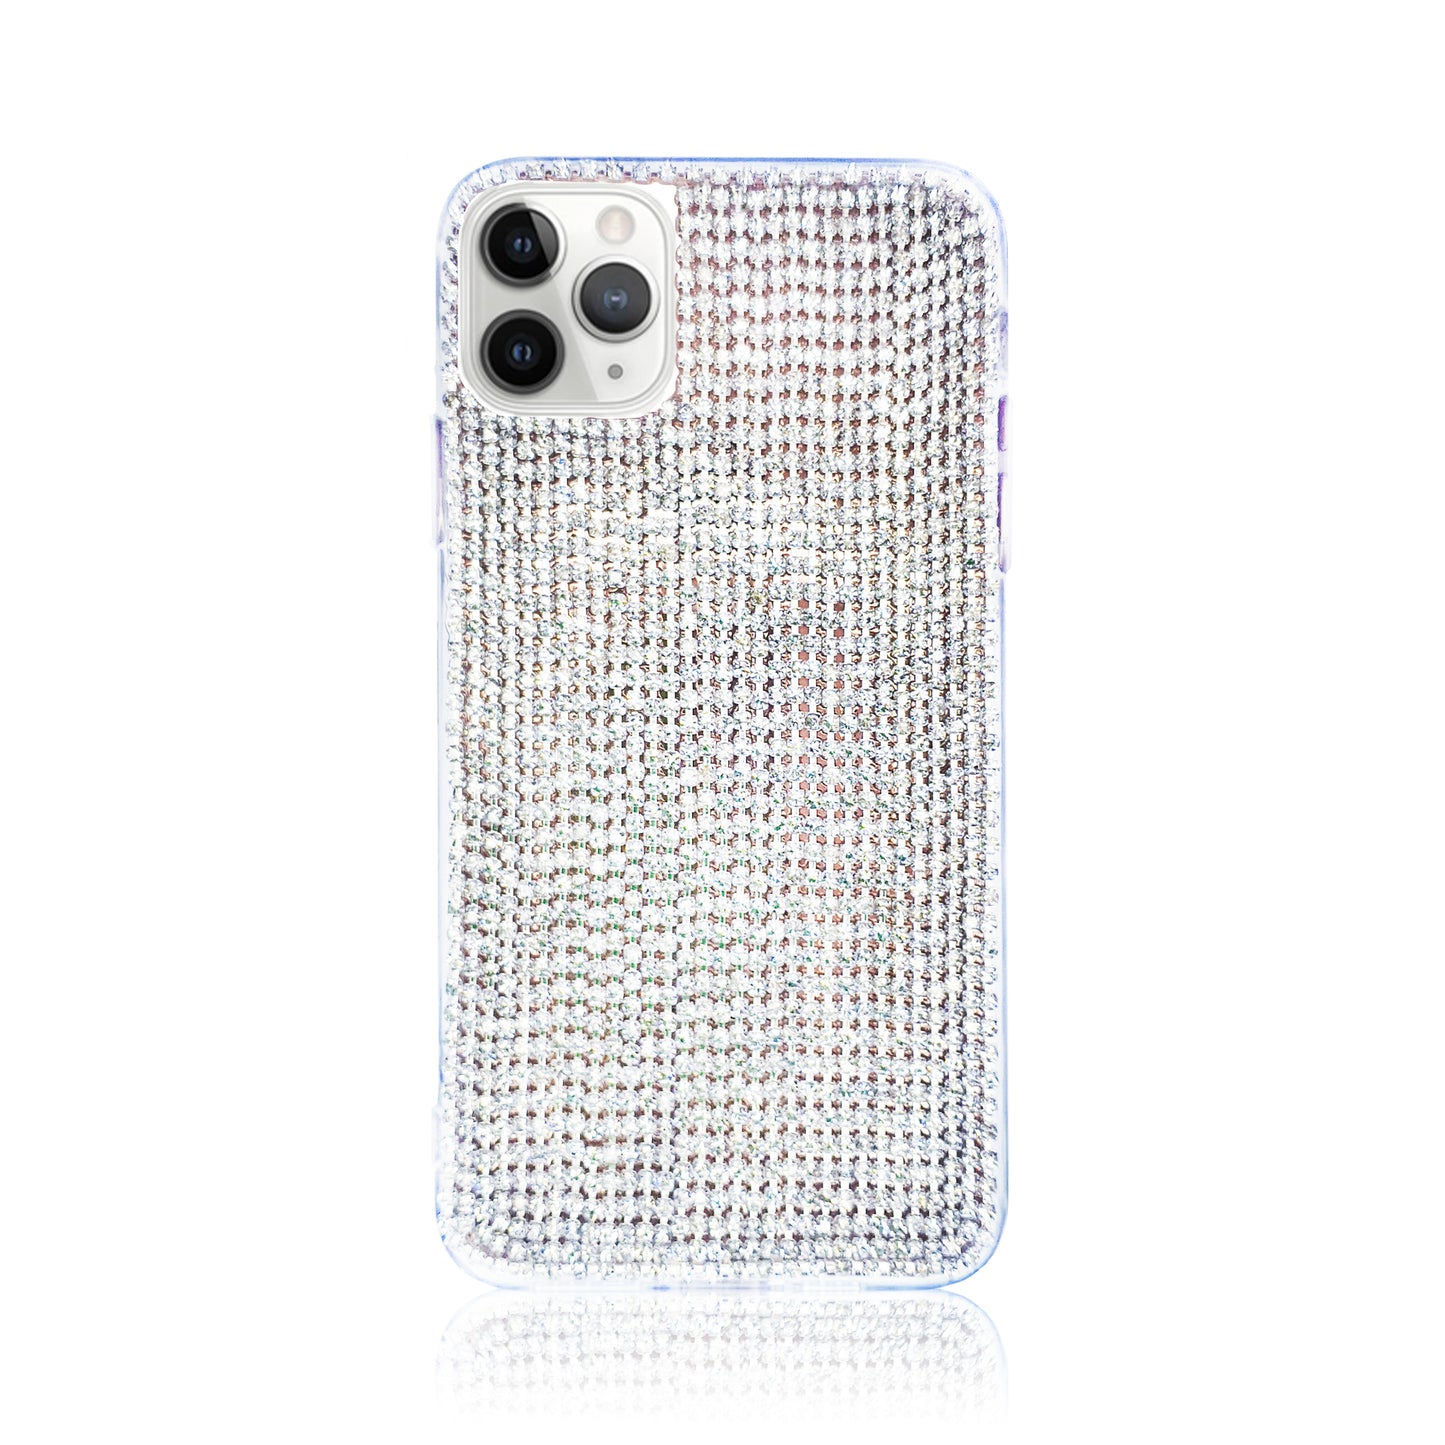 Crystal White Silicon iPhone Case